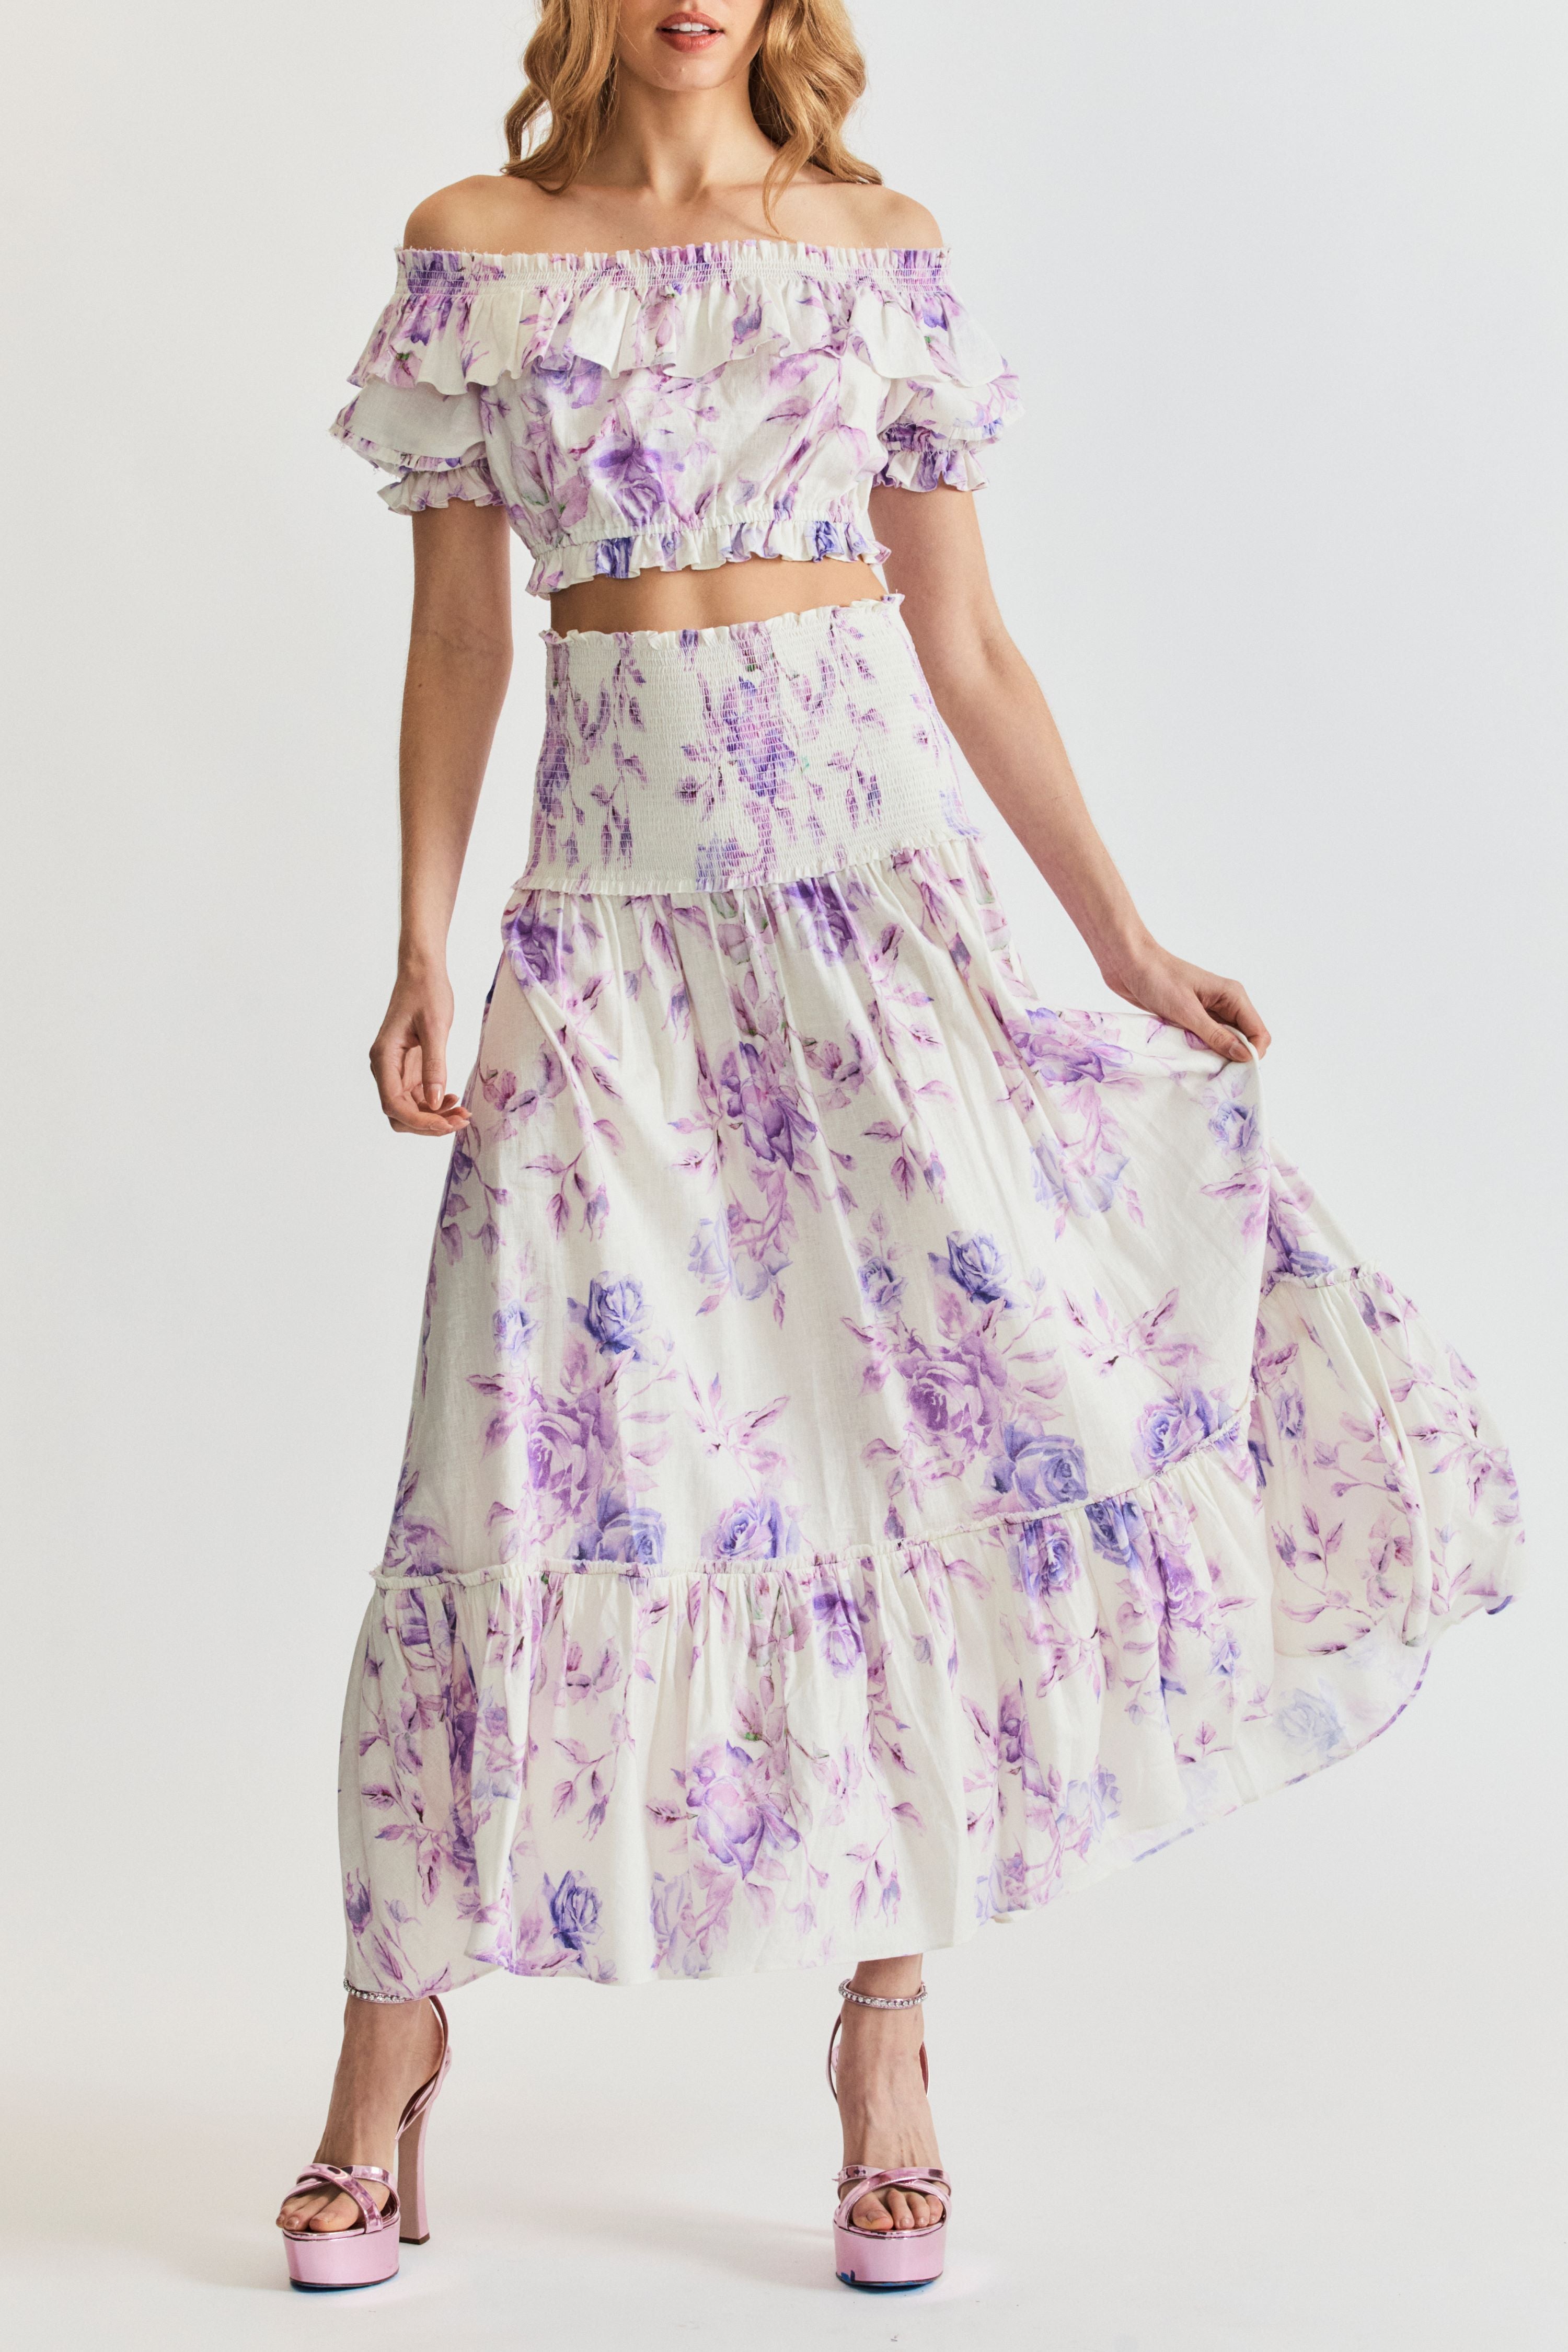 LoveShackFancy Audrille crop top. Off the shoulder ruffle crop top in white with purple floral print.